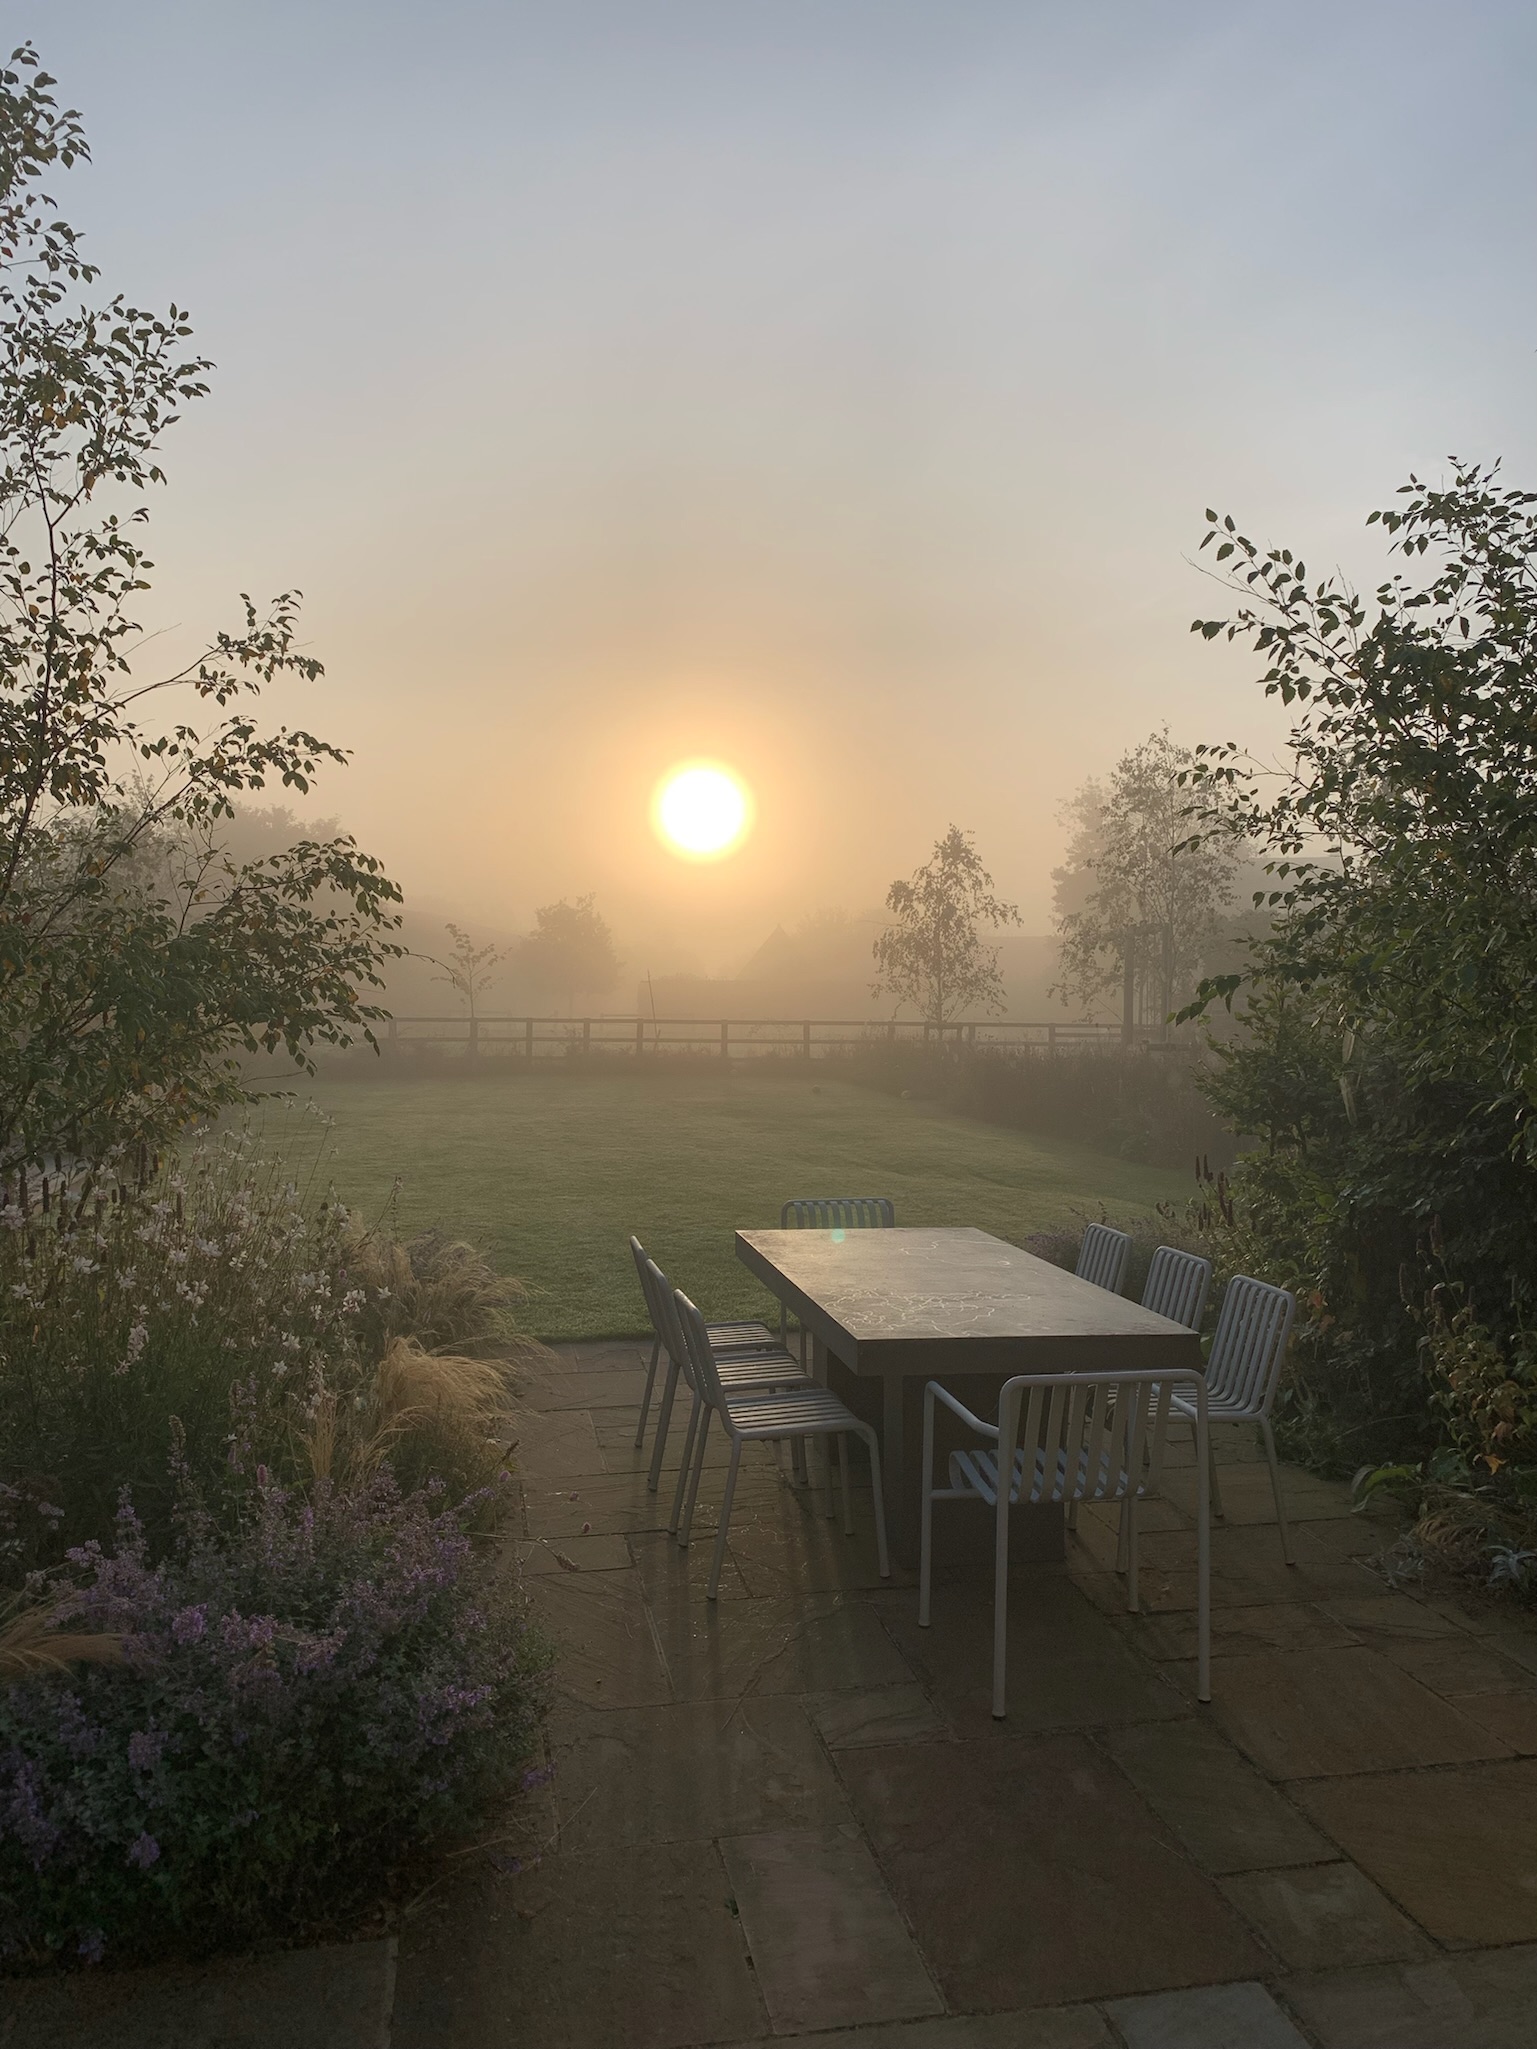 Misty sunrise morning over Cotswold garden by Hendy Curzon